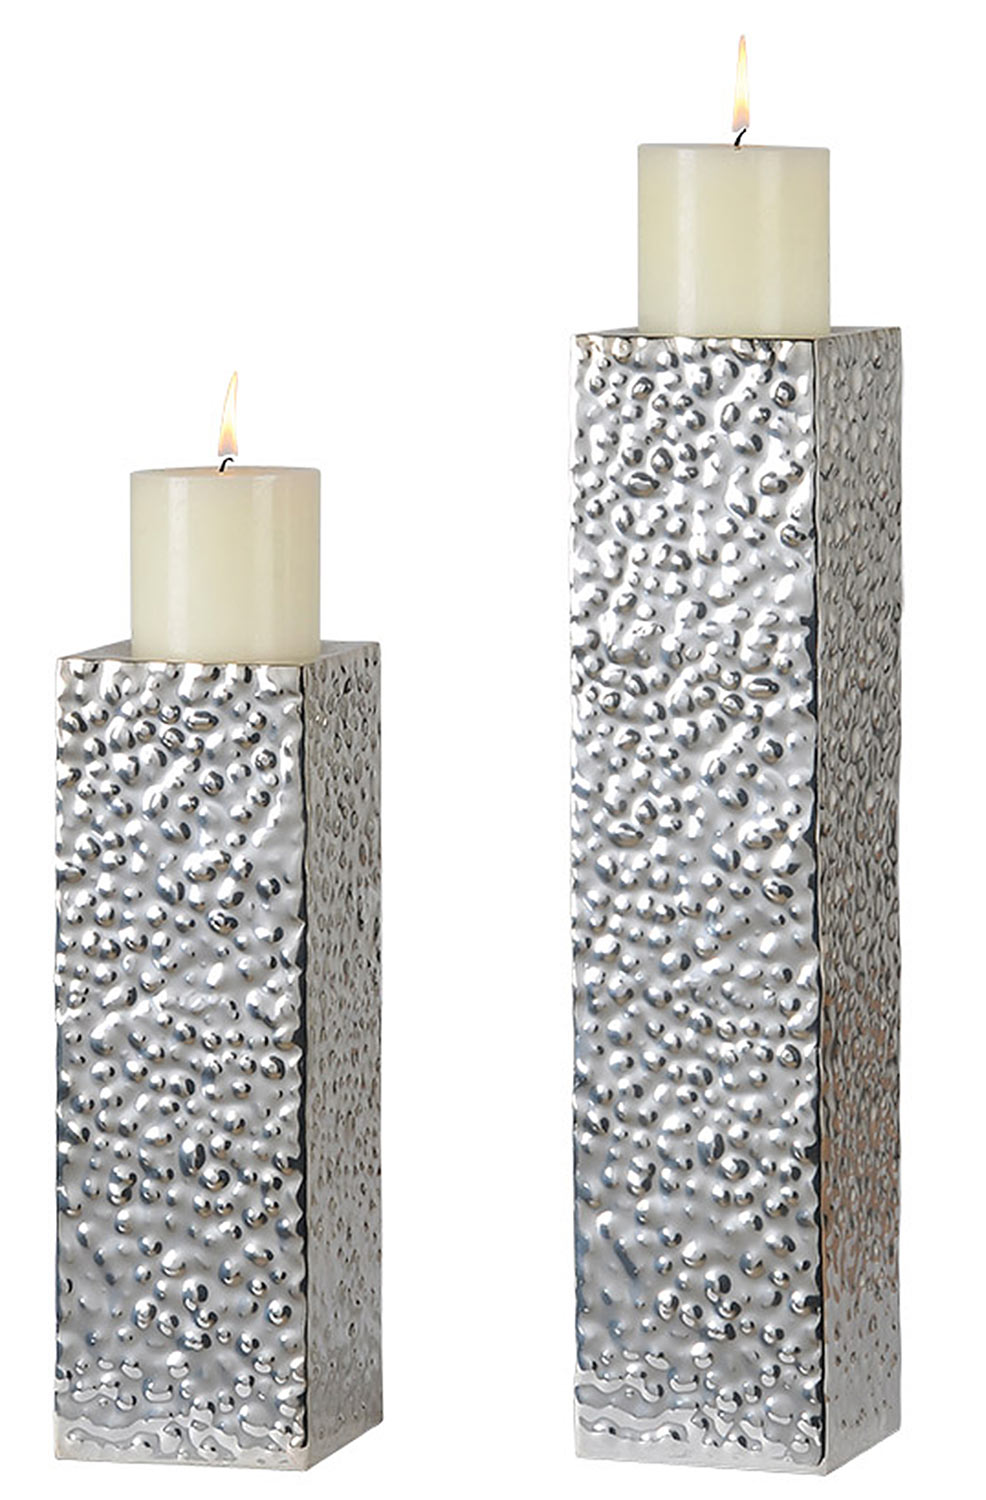 Ren-Wil Hamlet Candle Holder - Silver Plated